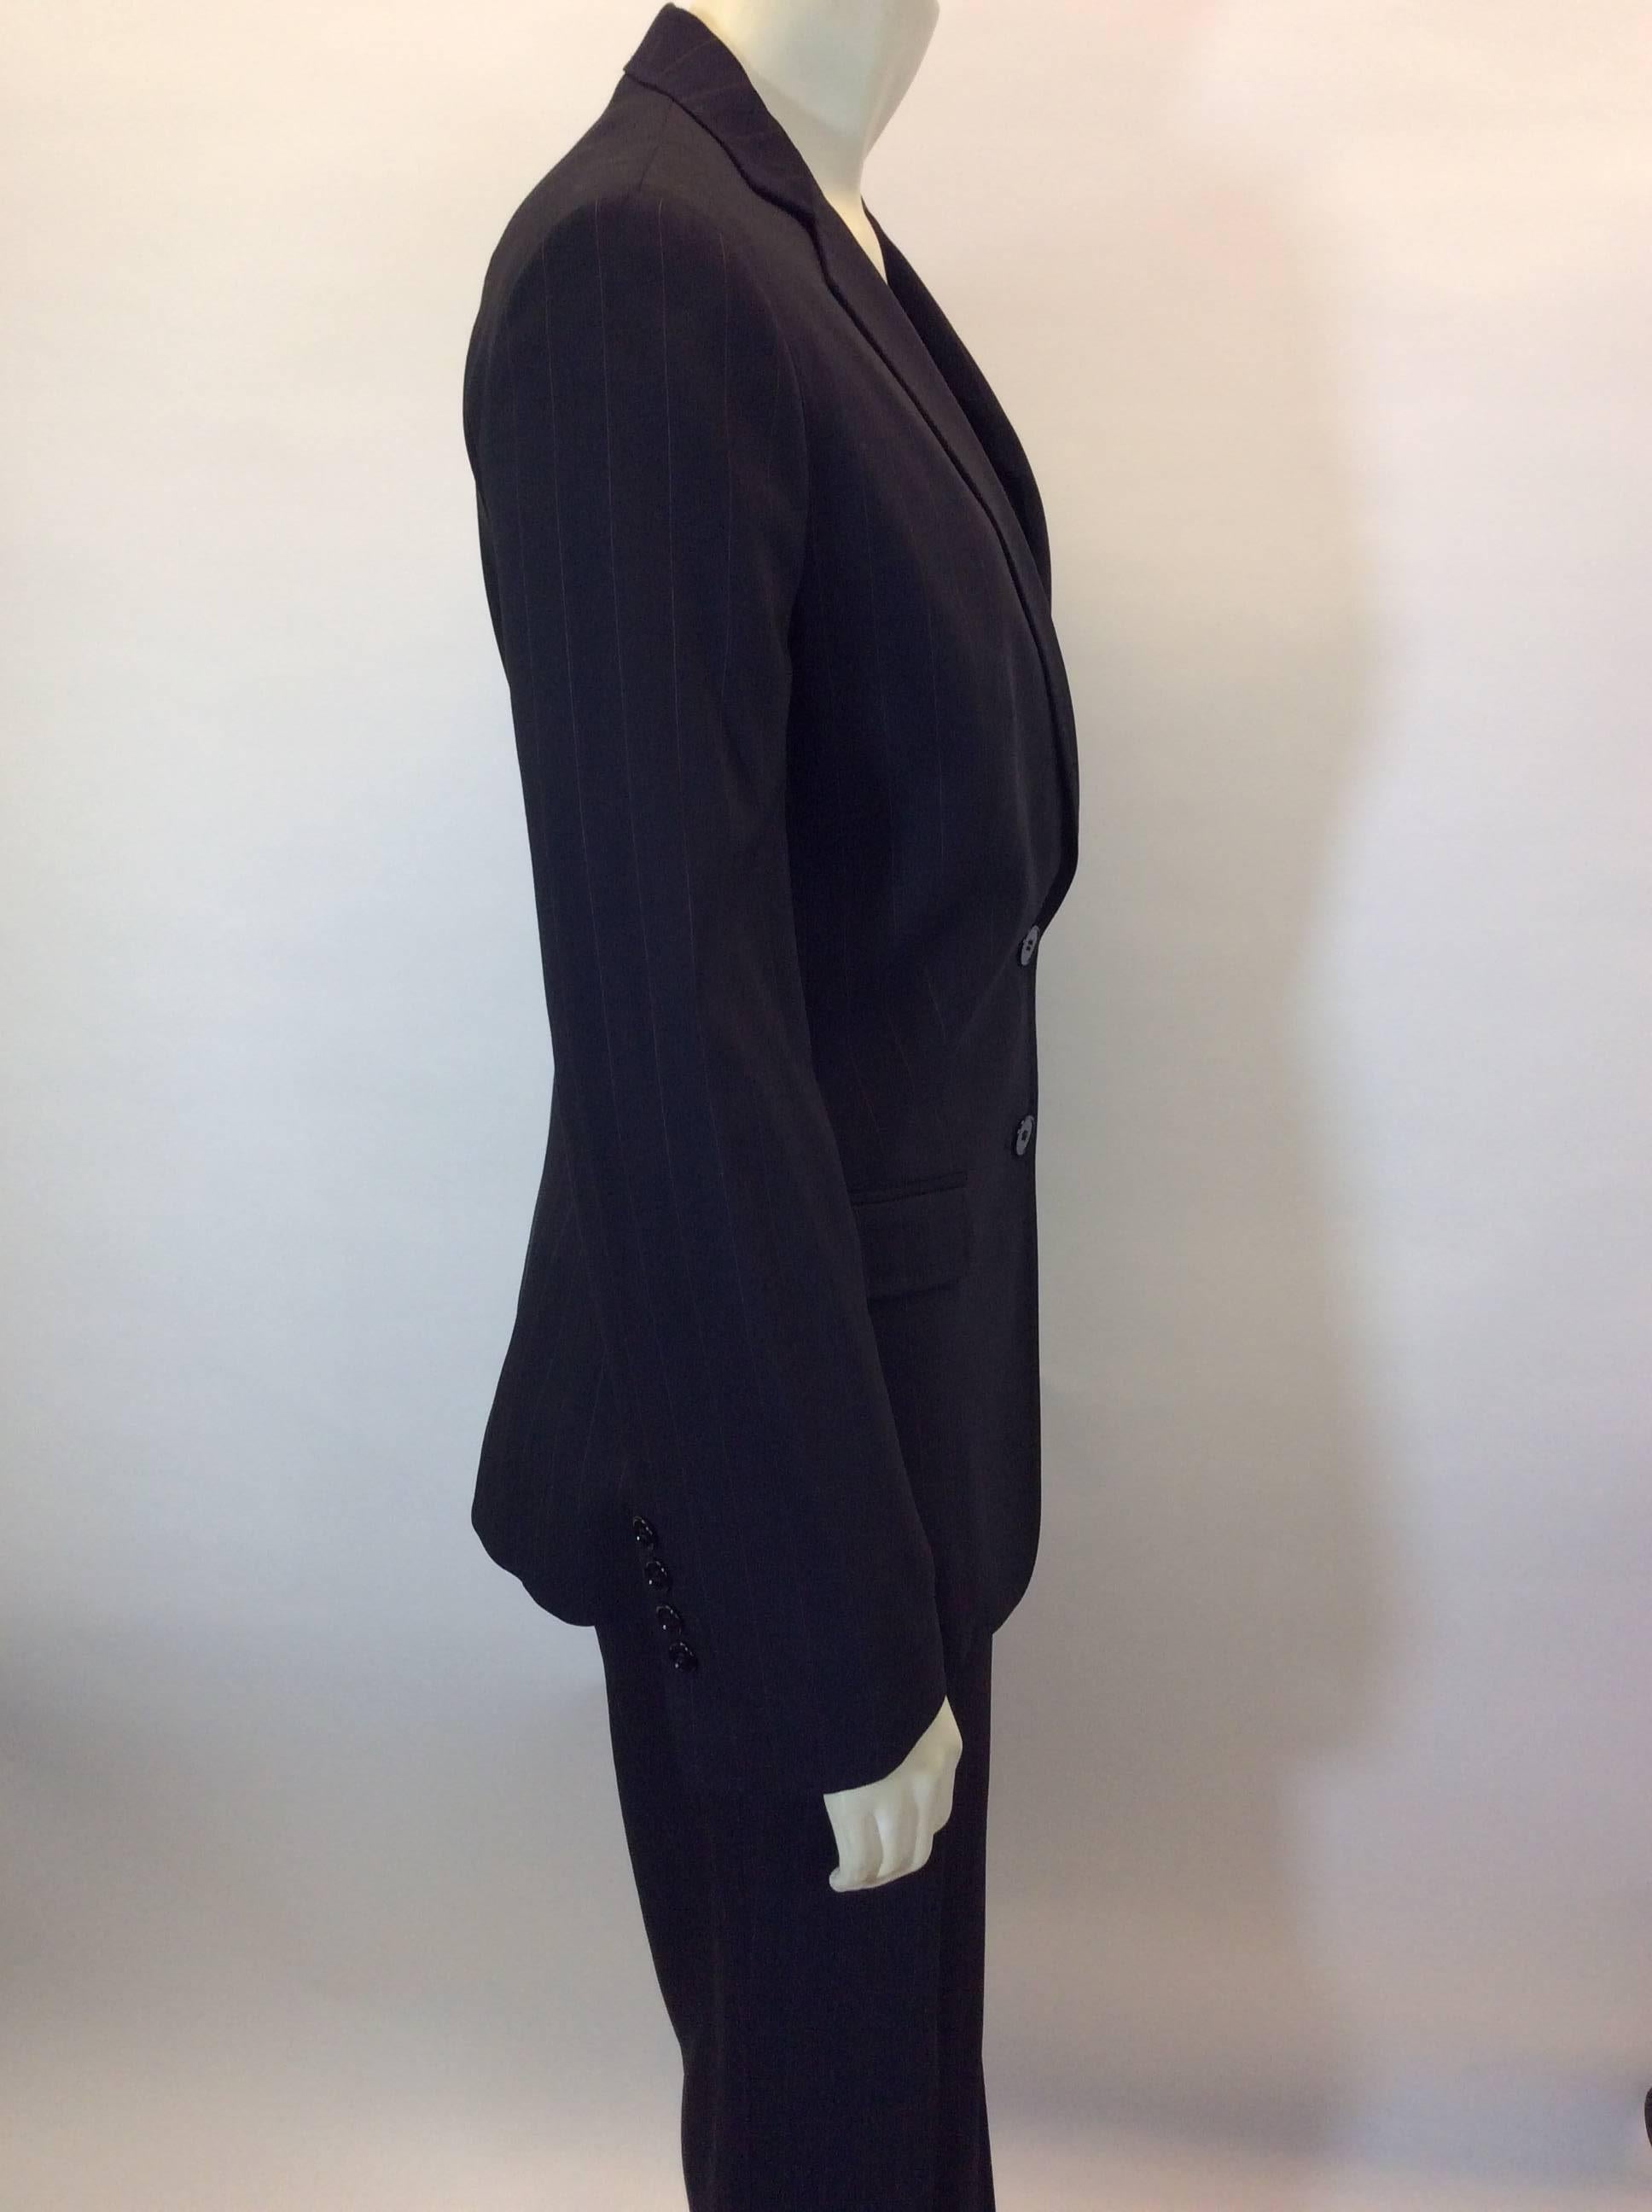 Women's Dolce & Gabbana Black Pantsuit with Red Toned Pinstripes For Sale